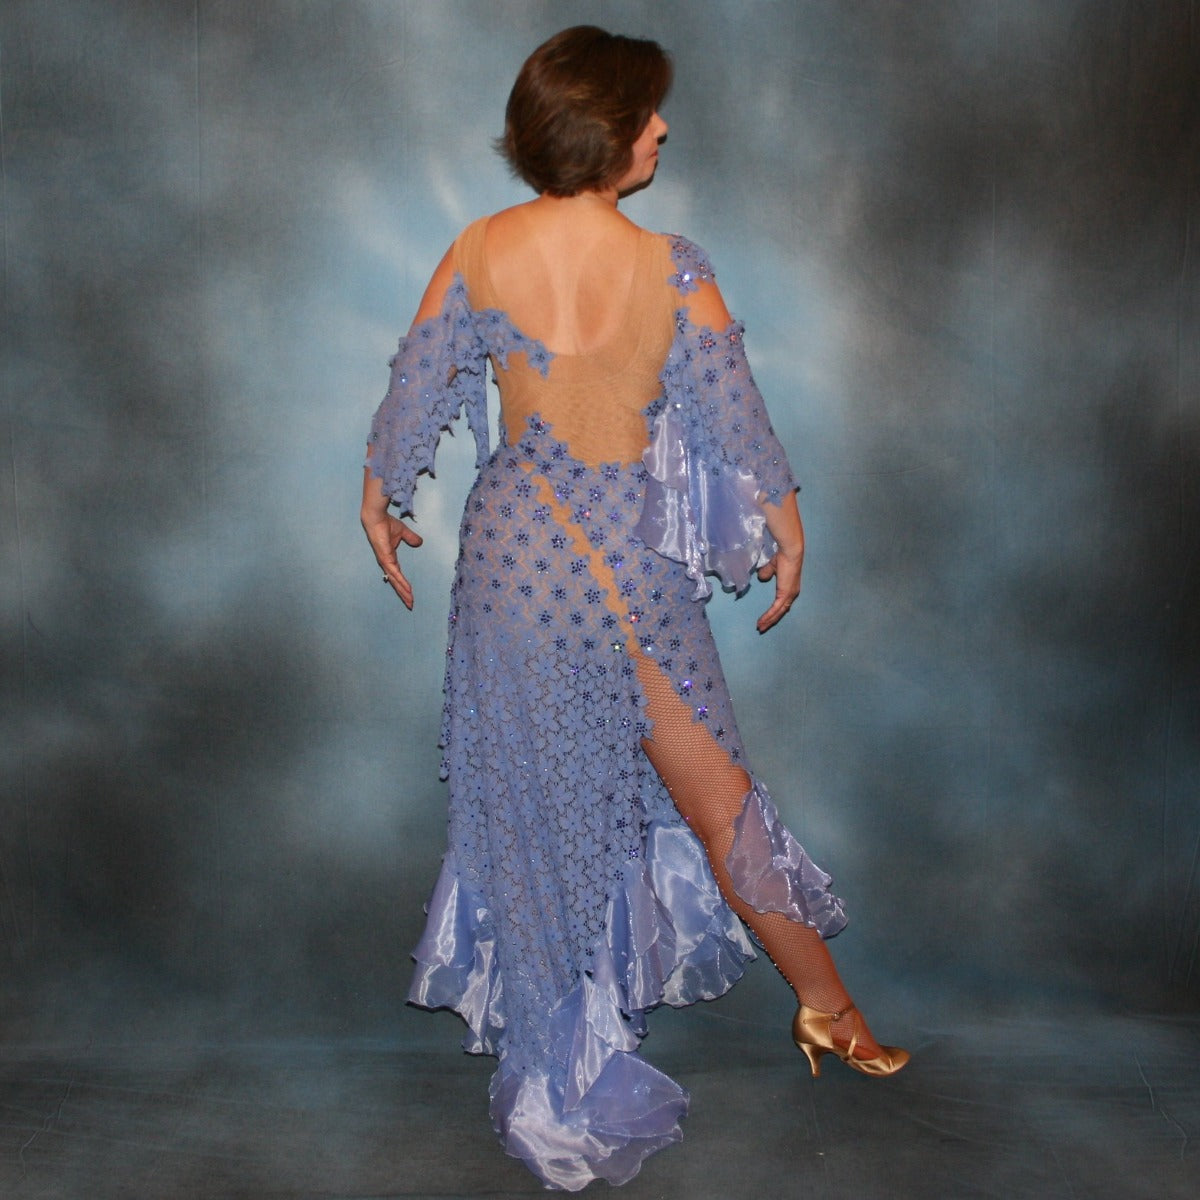 Crystal's Creations back view of Lavender Latin/rhythm dress created in periwinkle stretch lace on nude illusion base, with hand cut details, flounces of periwinkle organza, embellished with Swarovski rhinestone work of tanzanite, CAB, & tanzanite ab.